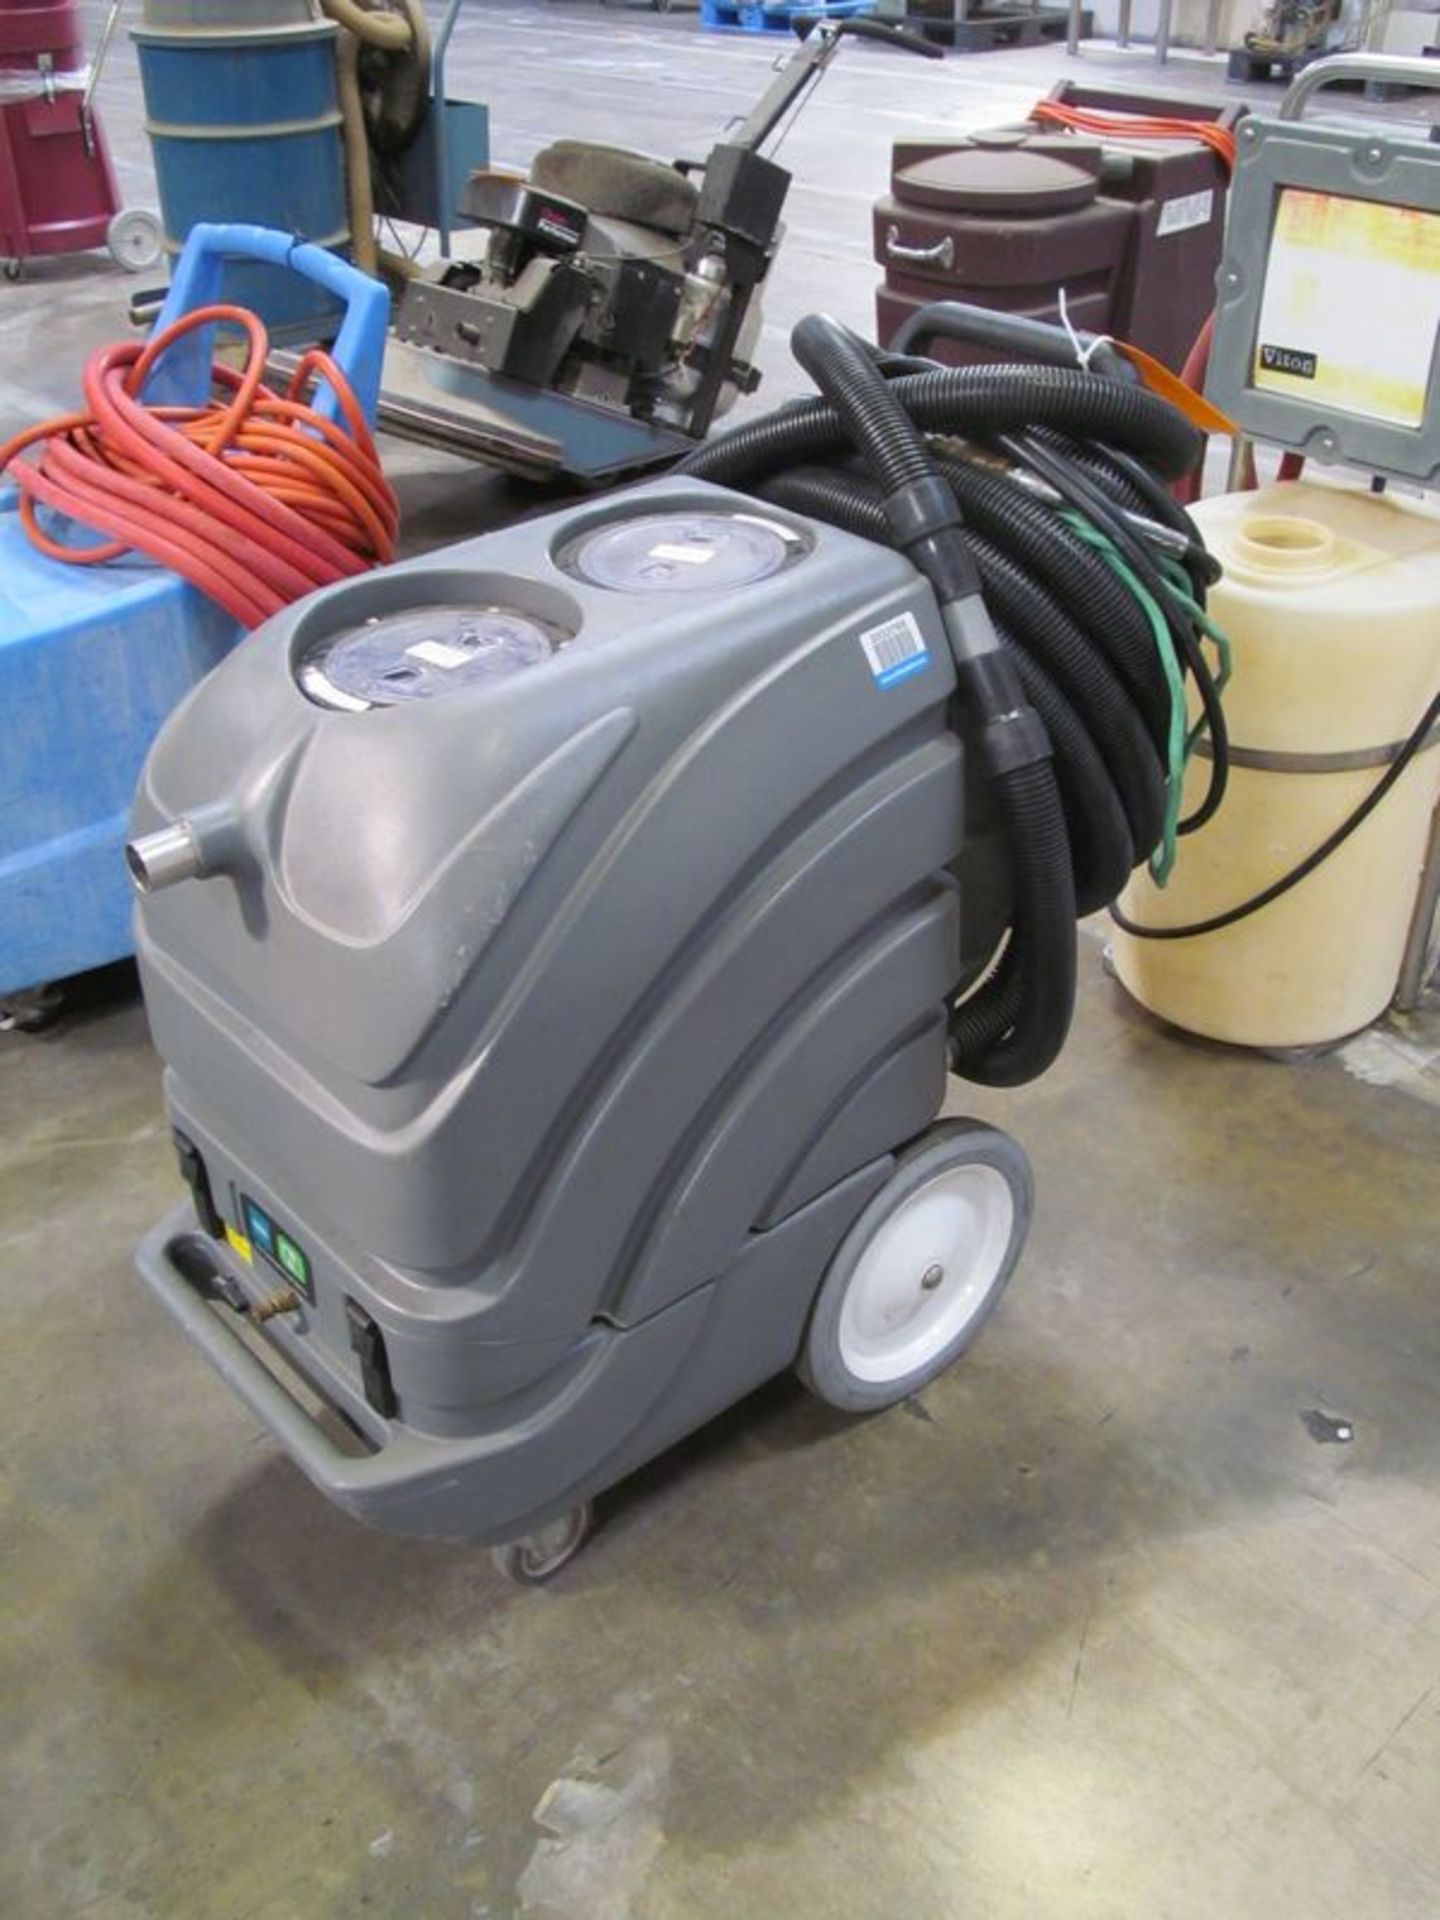 Tennant Floor Sweeper/Scrubber , With less then 48 hours of use. (Sub Location: Building #9)(UID#